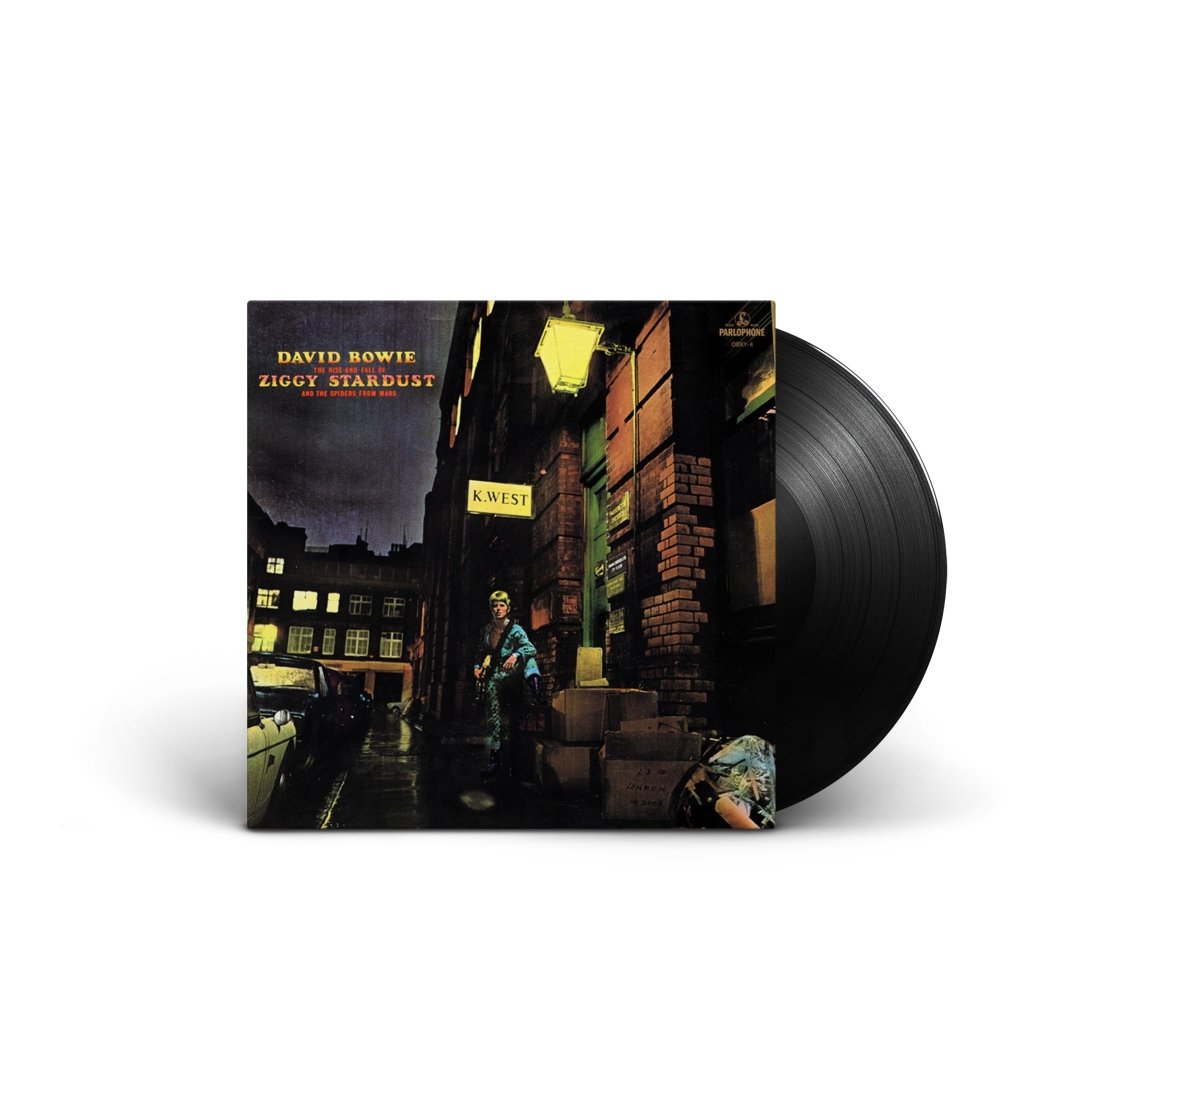 David Bowie - The Rise And Fall Of Ziggy Stardust And The Spiders From Mars Vinyl